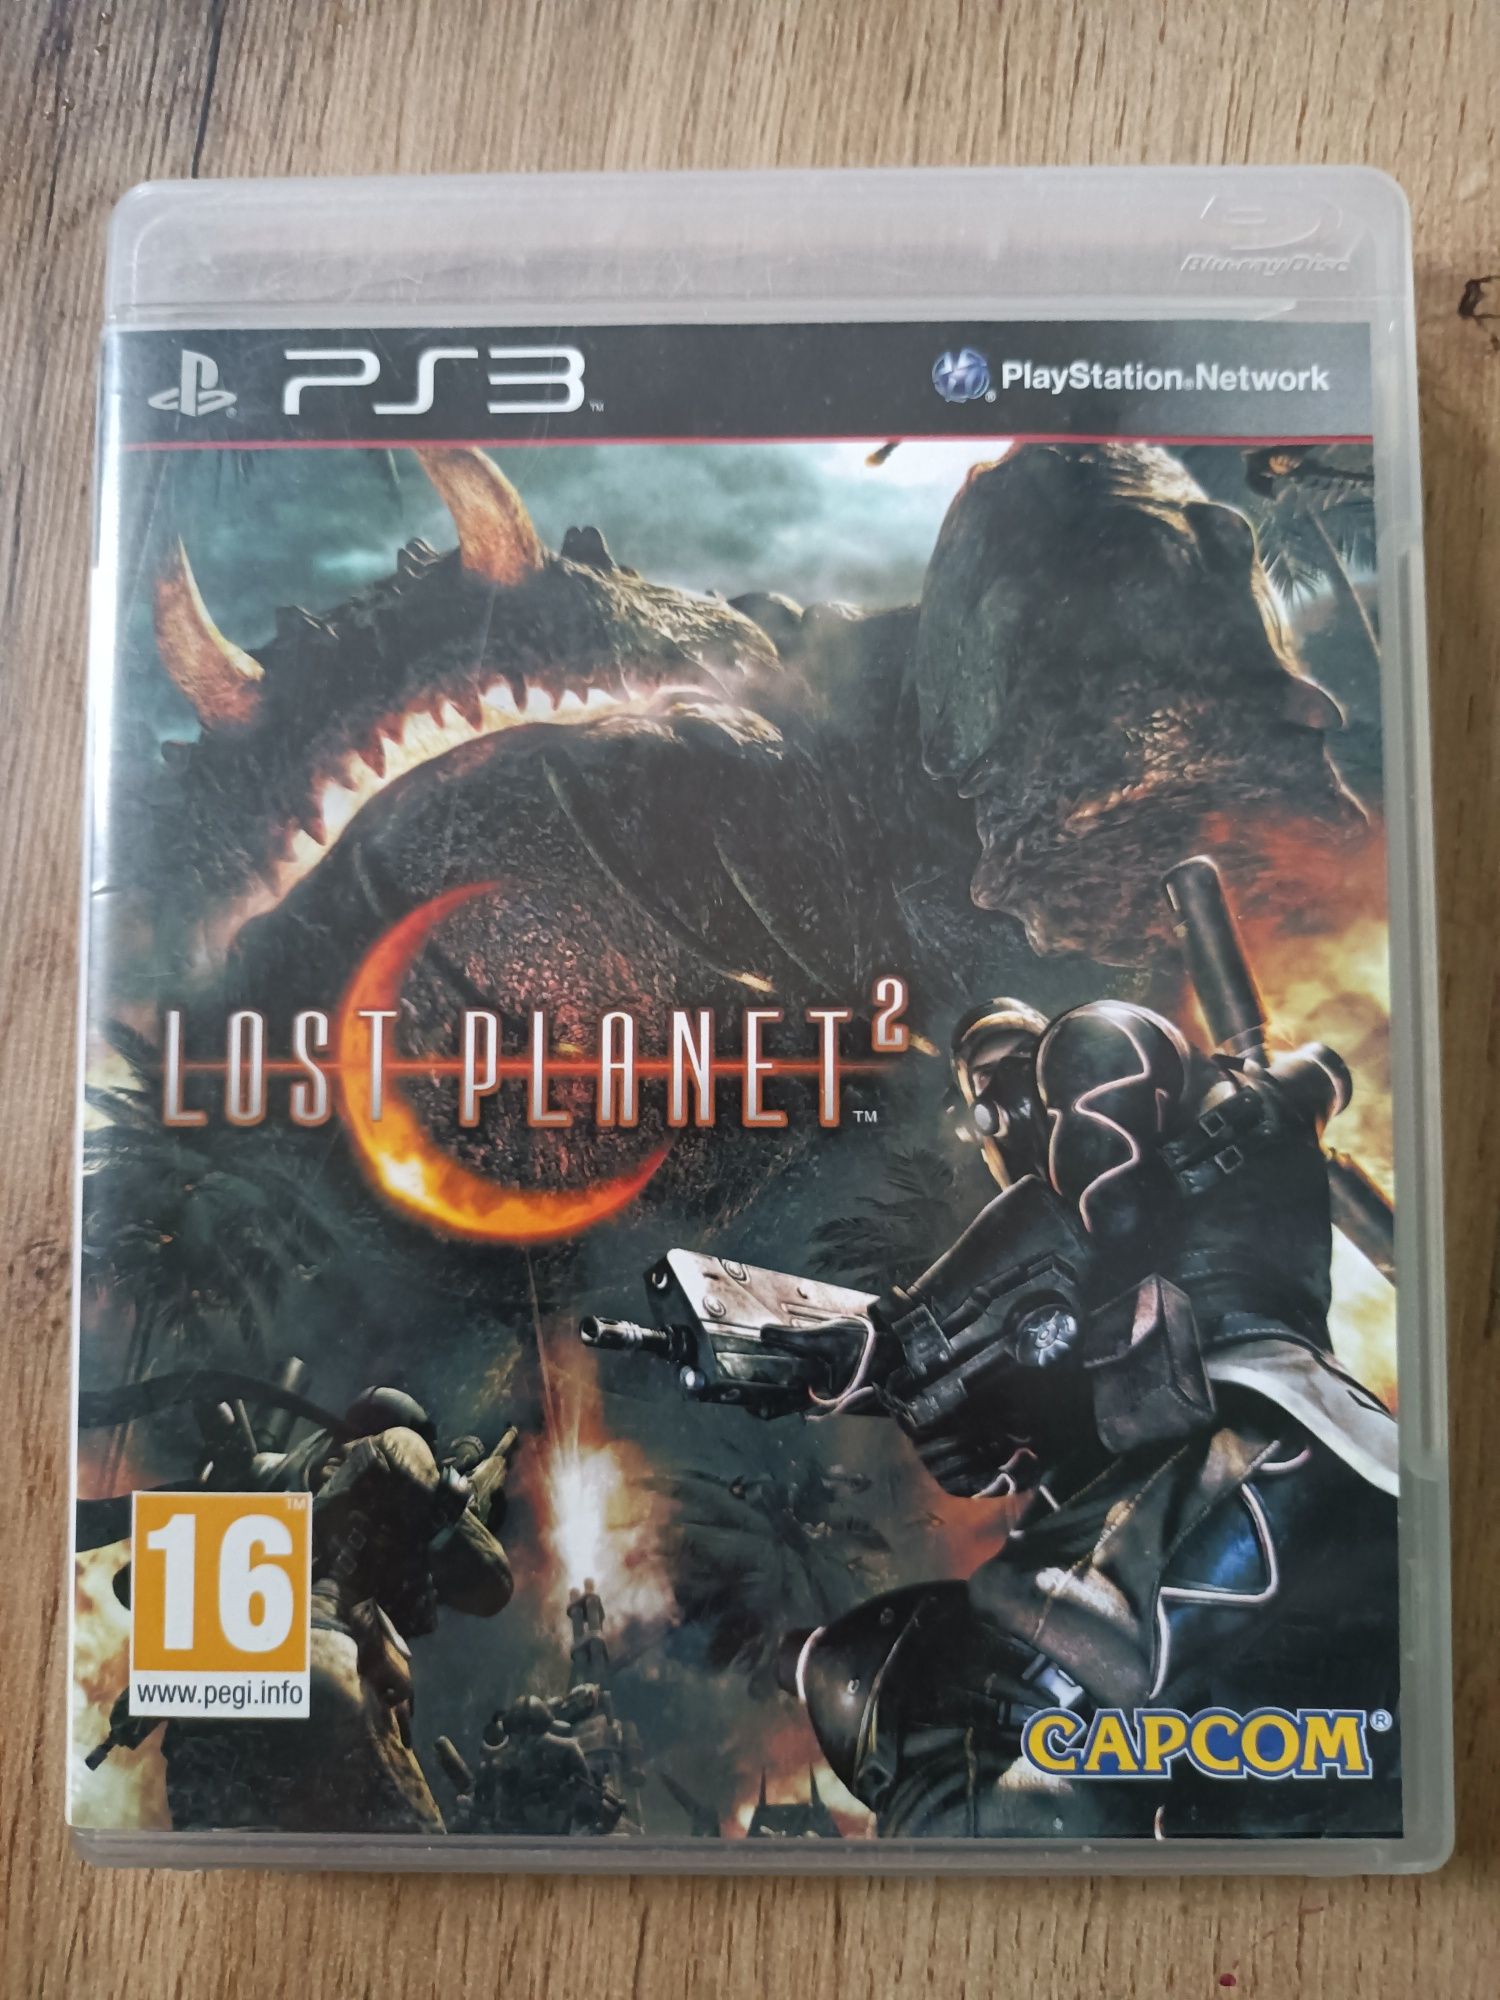 Lost Planet 2 PS3